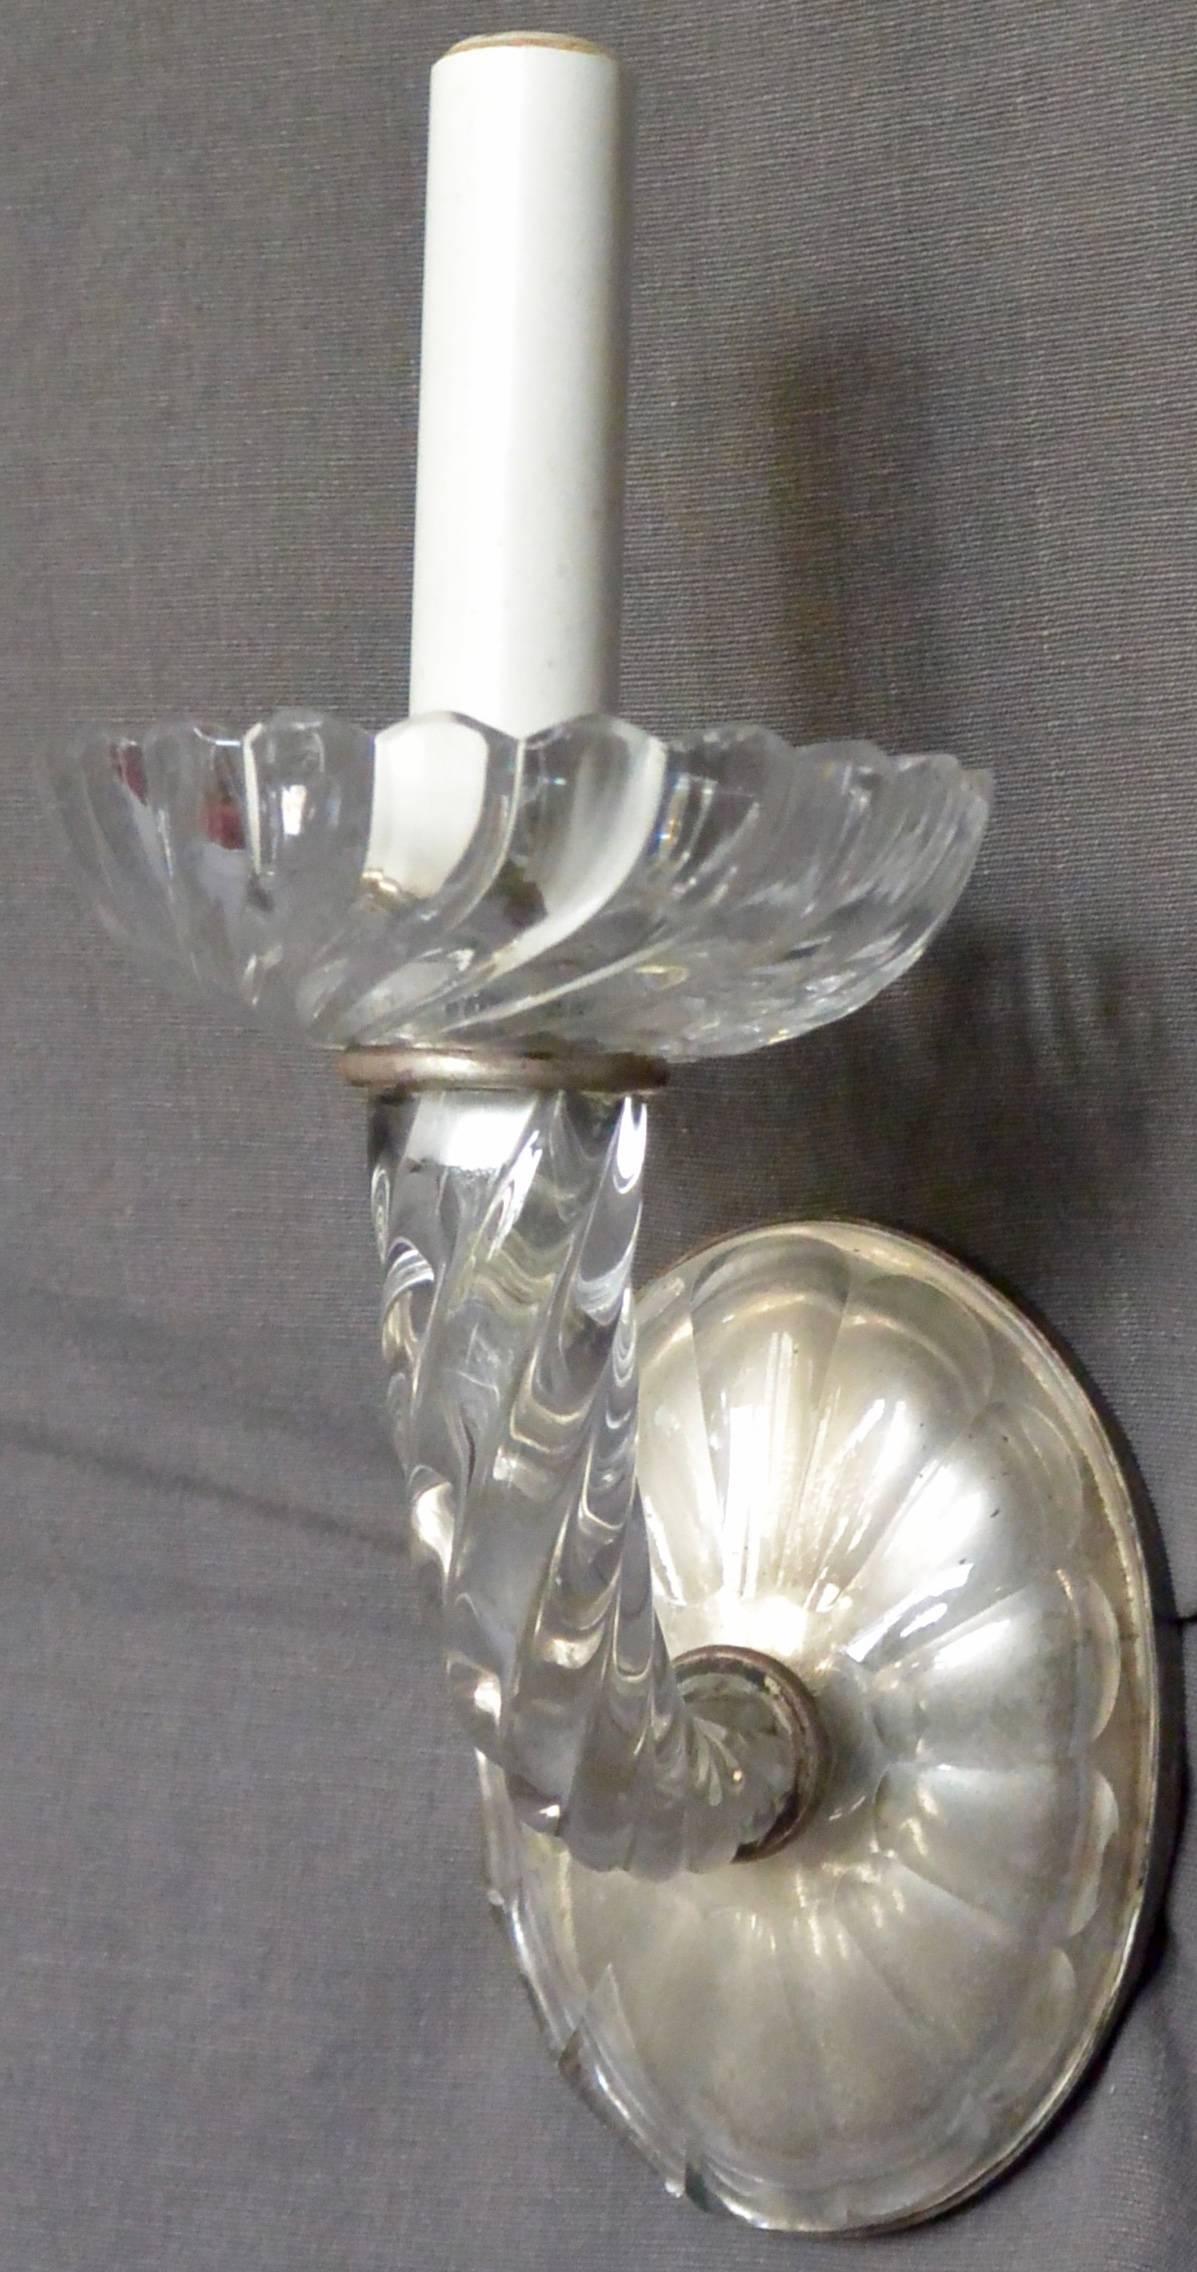 Vintage French rope glass sconce with single candlesleeve and fluted bobeche above twisted rope arm and oval fluted glass and steel back plate, newly electrified, France, circa 1940. 
Dimensions: 5.5